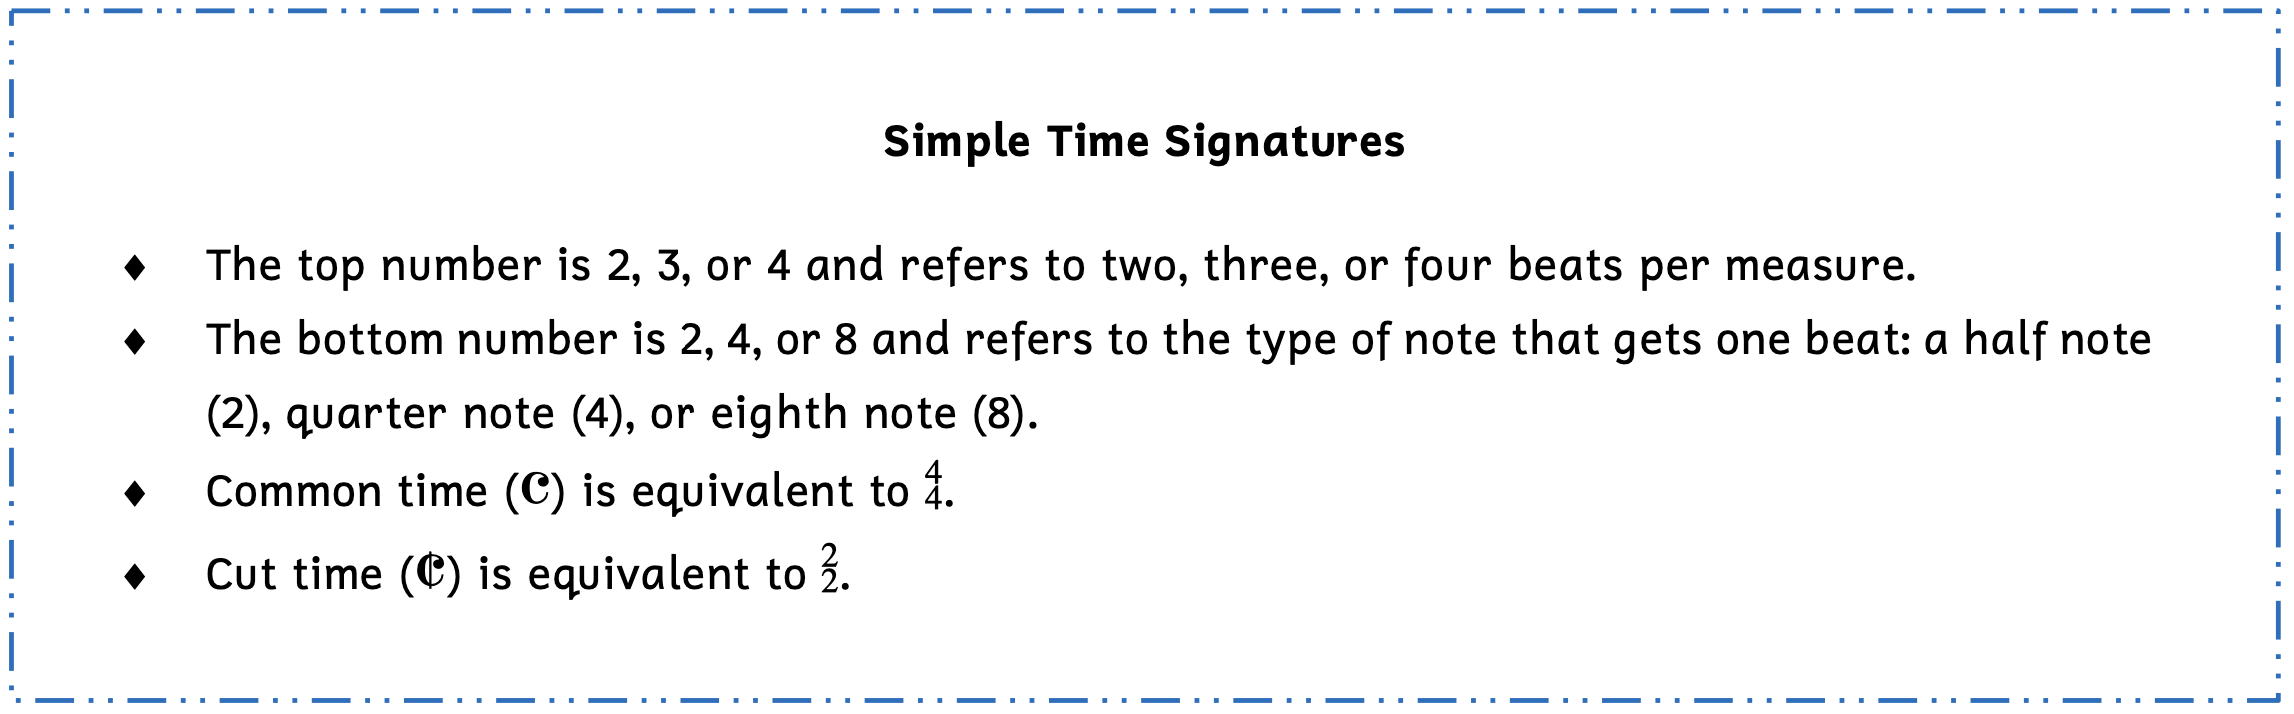 Summary box of simple time signatures. The top number is 2, 3, or 4 and refers to 2, 3, or 4 beats per measure. The bottom number is 2, 4, or 8 and refers to the type of note that gets one beat: 2 refers to a half note, 4 refers to a quarter note, and 8 refers to an eighth note. Common time is equivalent to 4/4. Cut time is equivalent to 2/2.